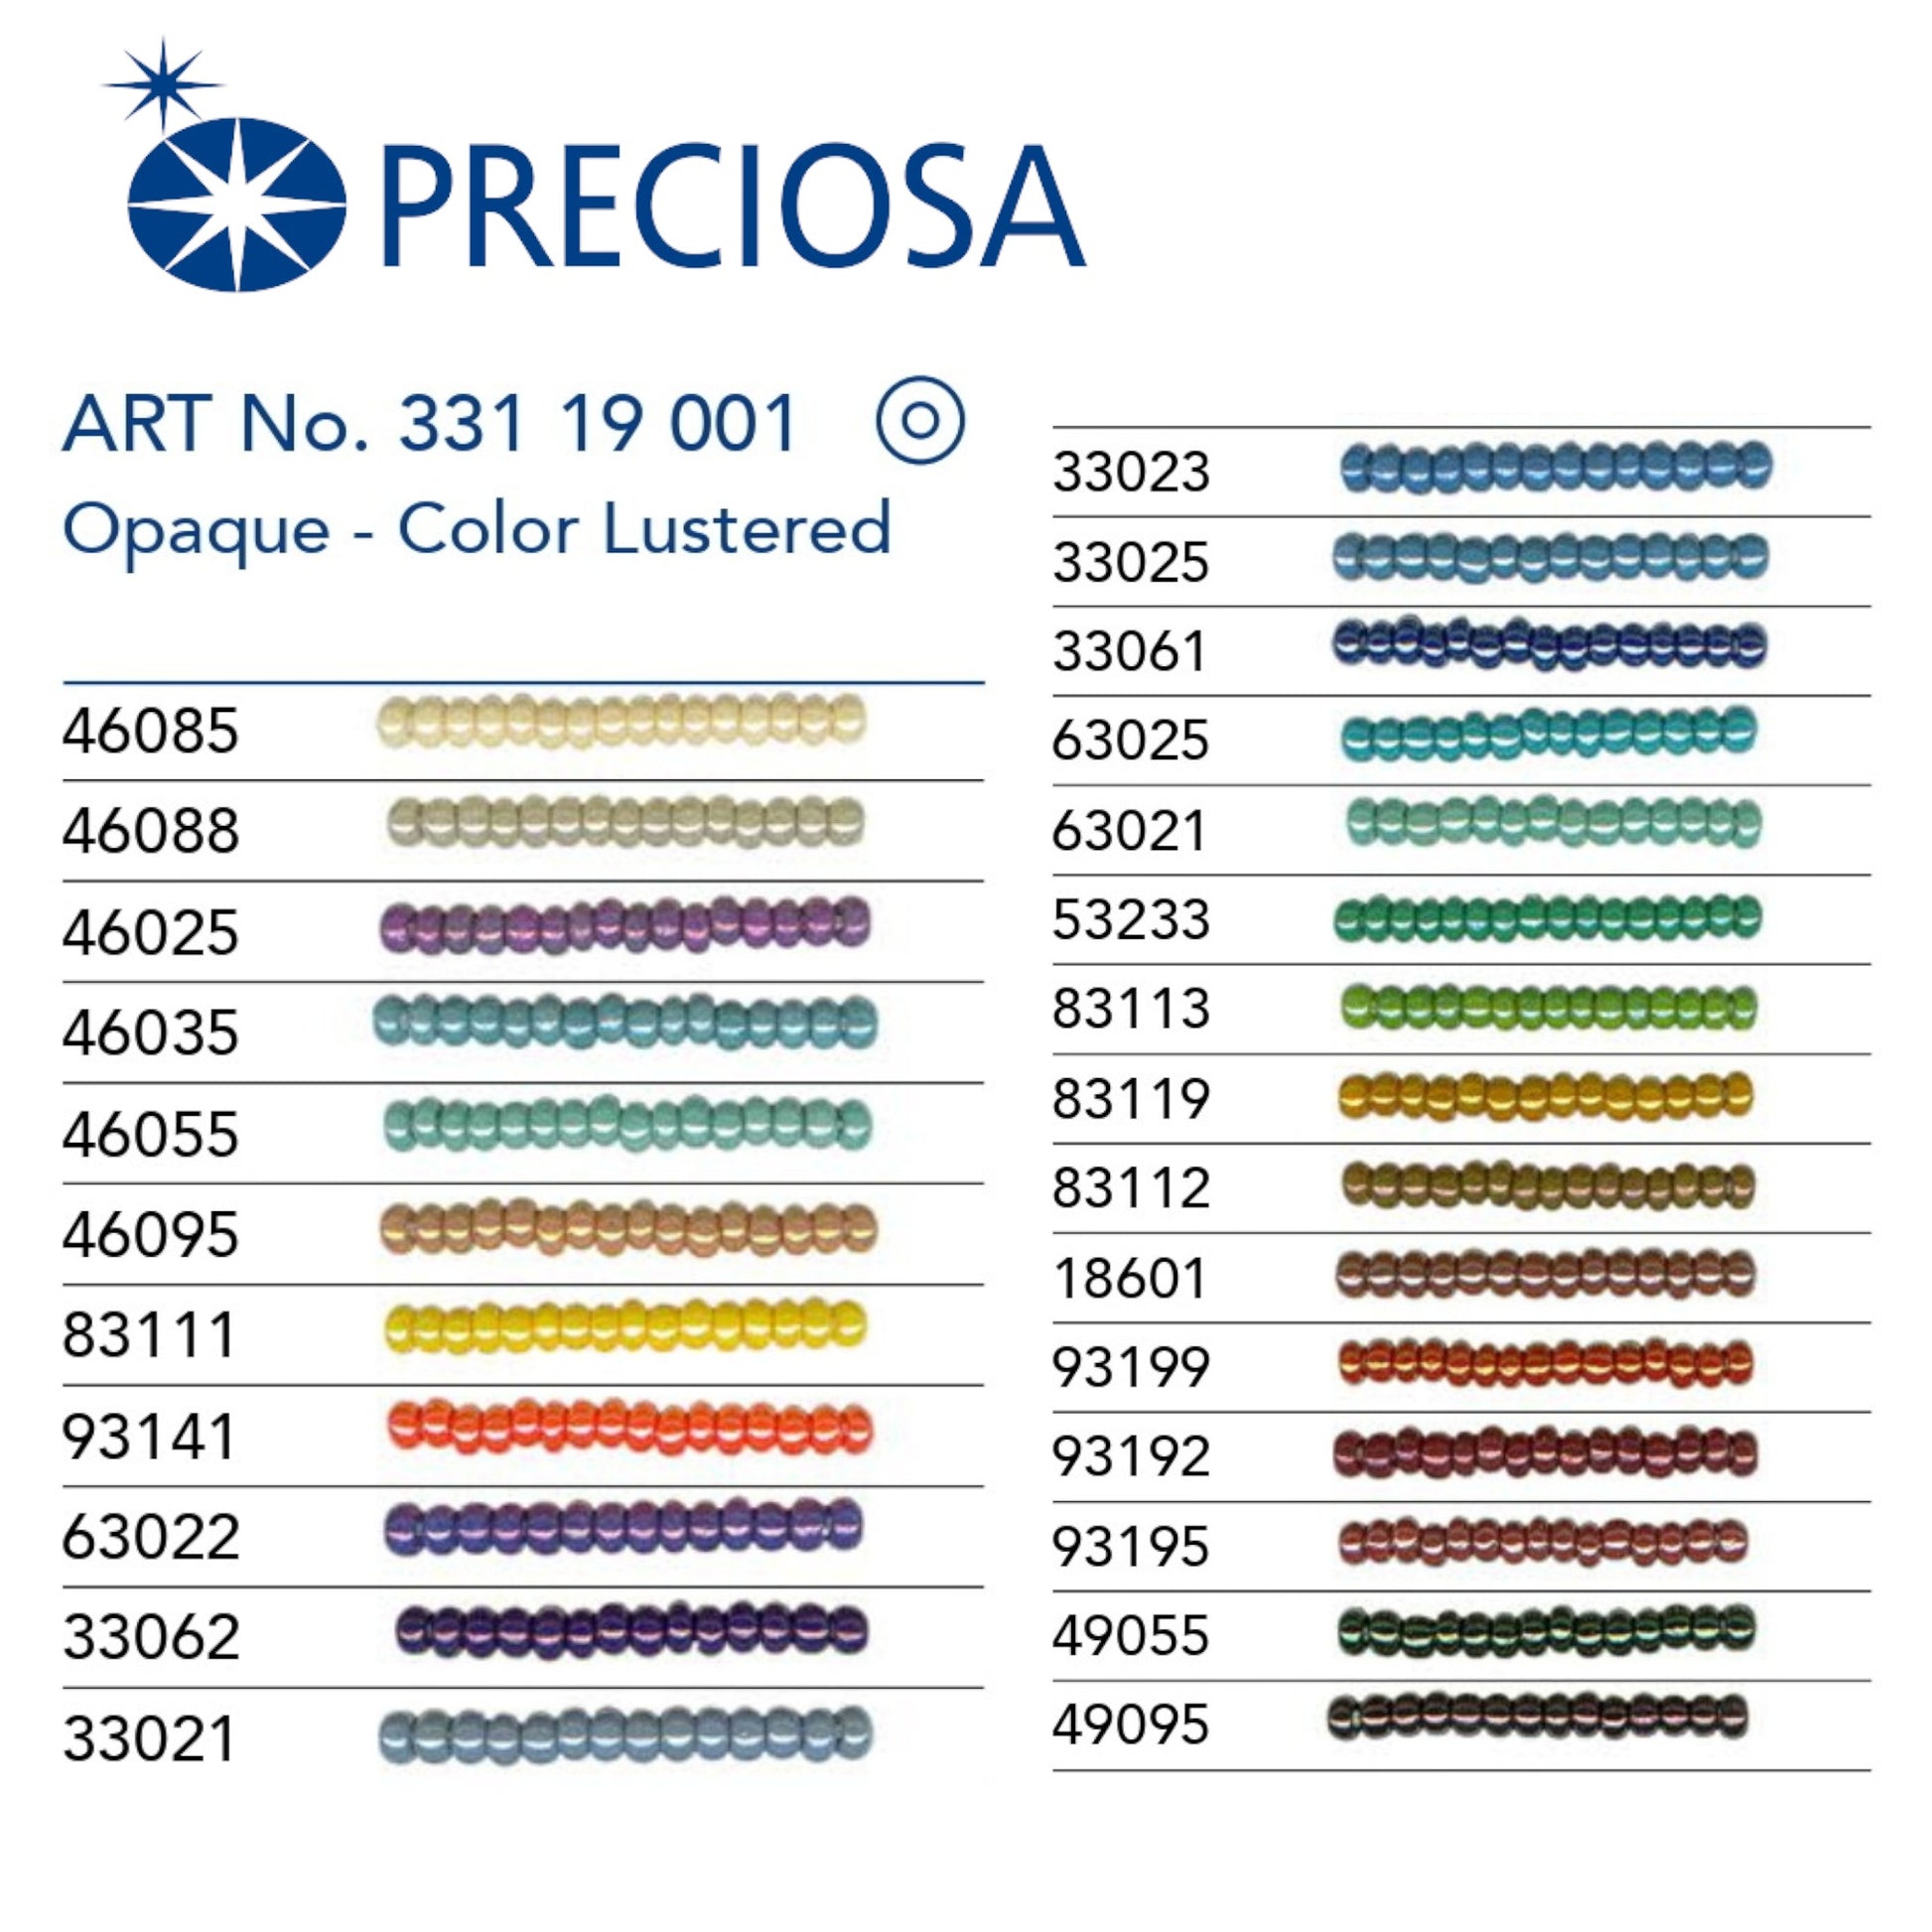 93192 Czech Seed Beads Preciosa Rocailes Opaque - Color Lustered - VadymShop